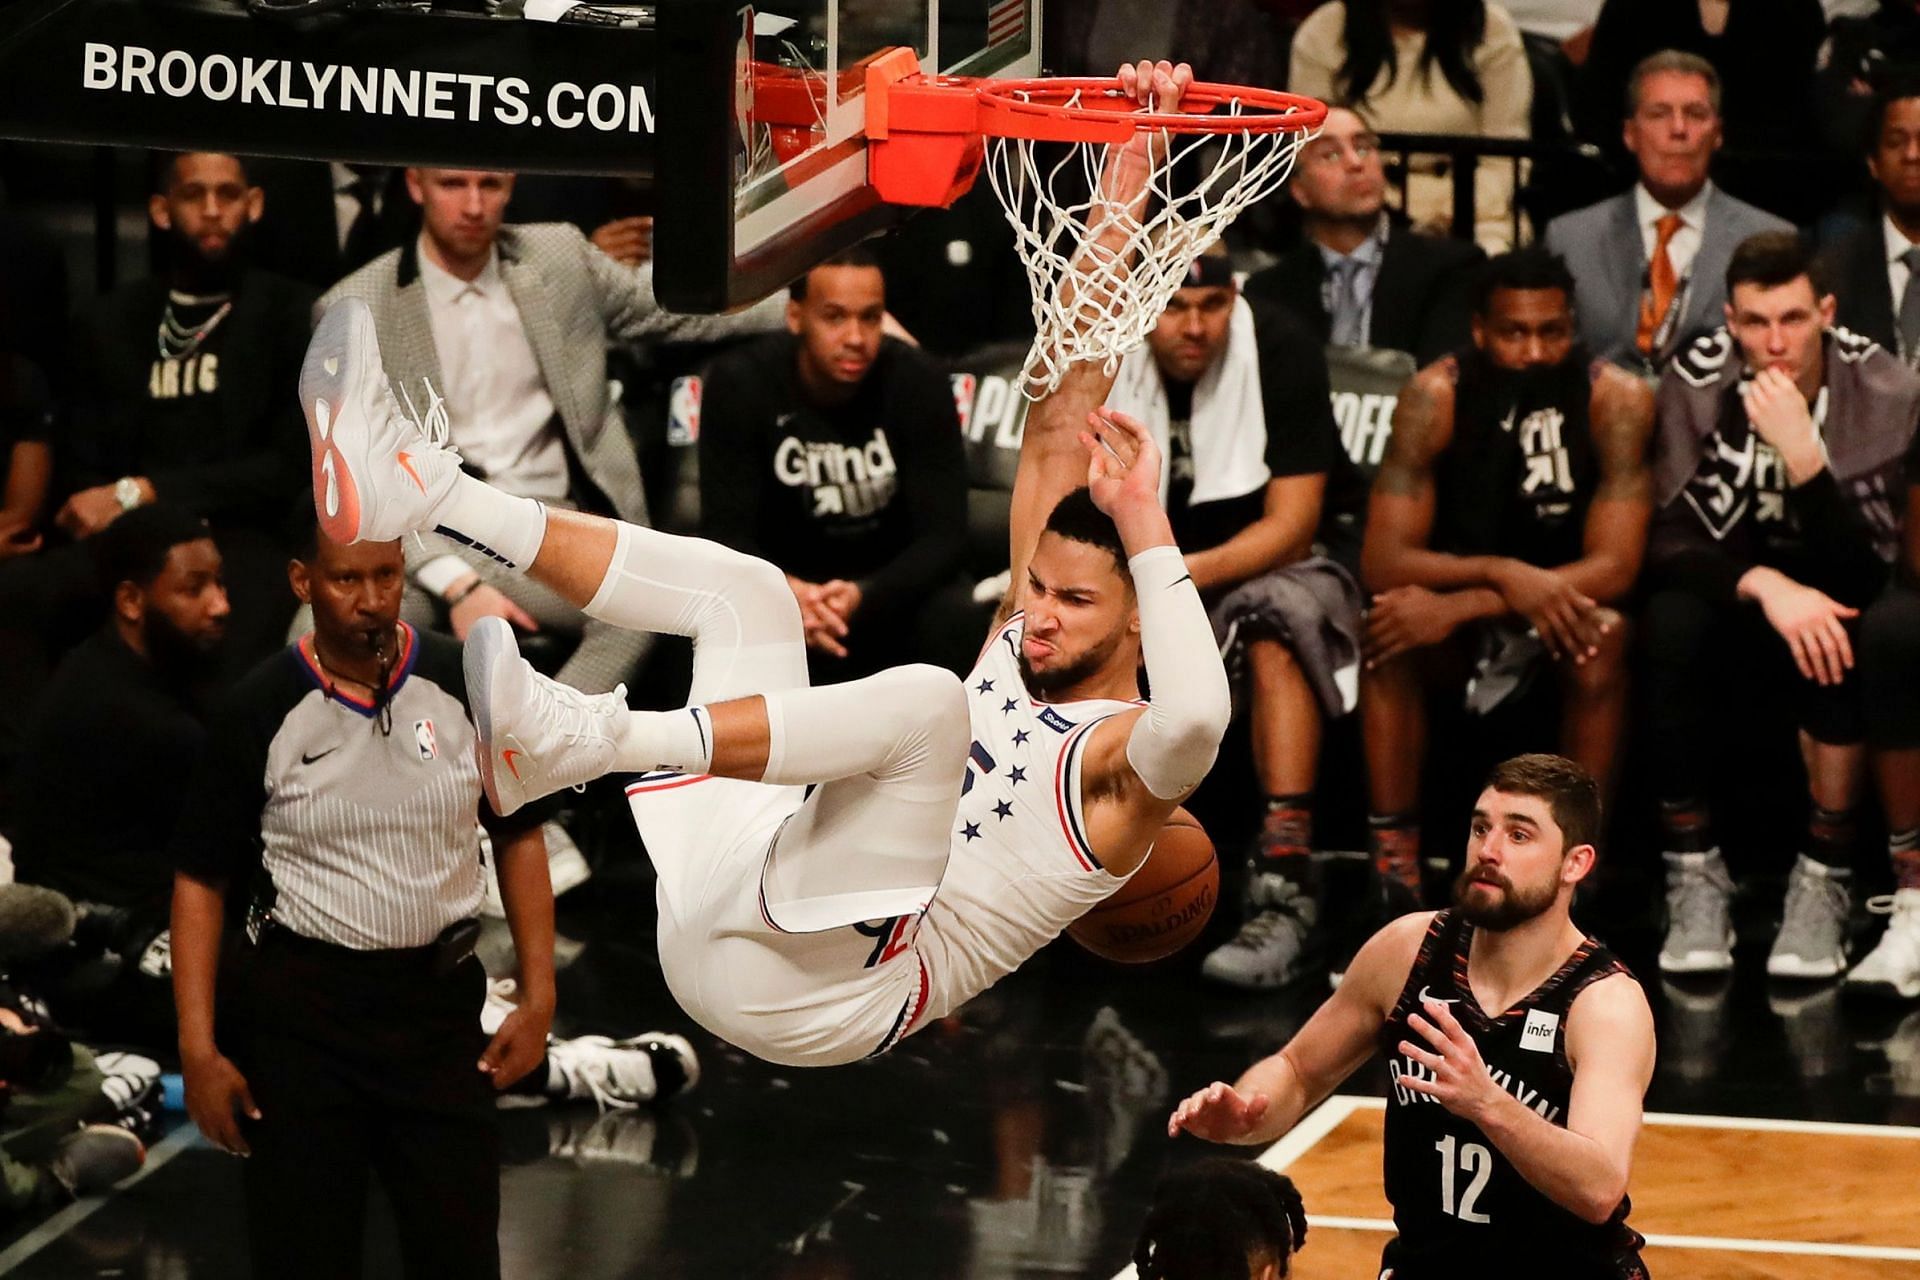 The rabid Philadelphia 76ers crowd endlessly jeered Ben Simmons, particularly after he slammed the ball during warmups in the game between the Brooklyn Nets and Philadelphia 76ers. [Photo: Philadelphia Inquirer]